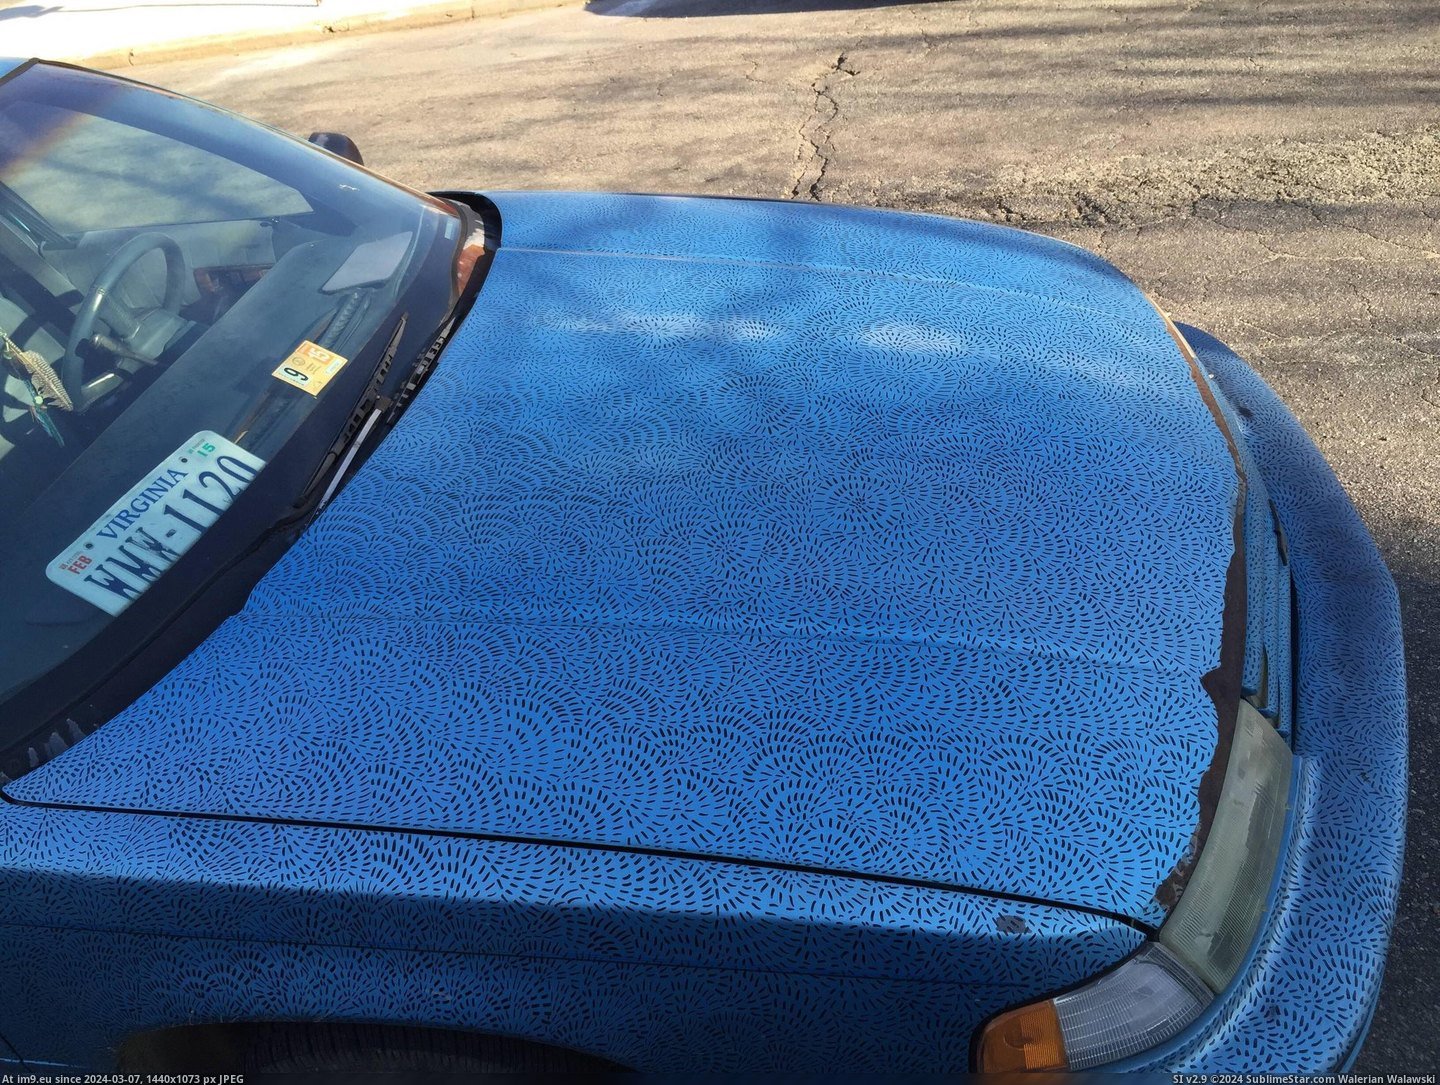 #Tiny #Entire #Sharpie #Markings #Car #Covered [Mildlyinteresting] The ENTIRE car was covered by tiny sharpie markings. Pic. (Изображение из альбом My r/MILDLYINTERESTING favs))